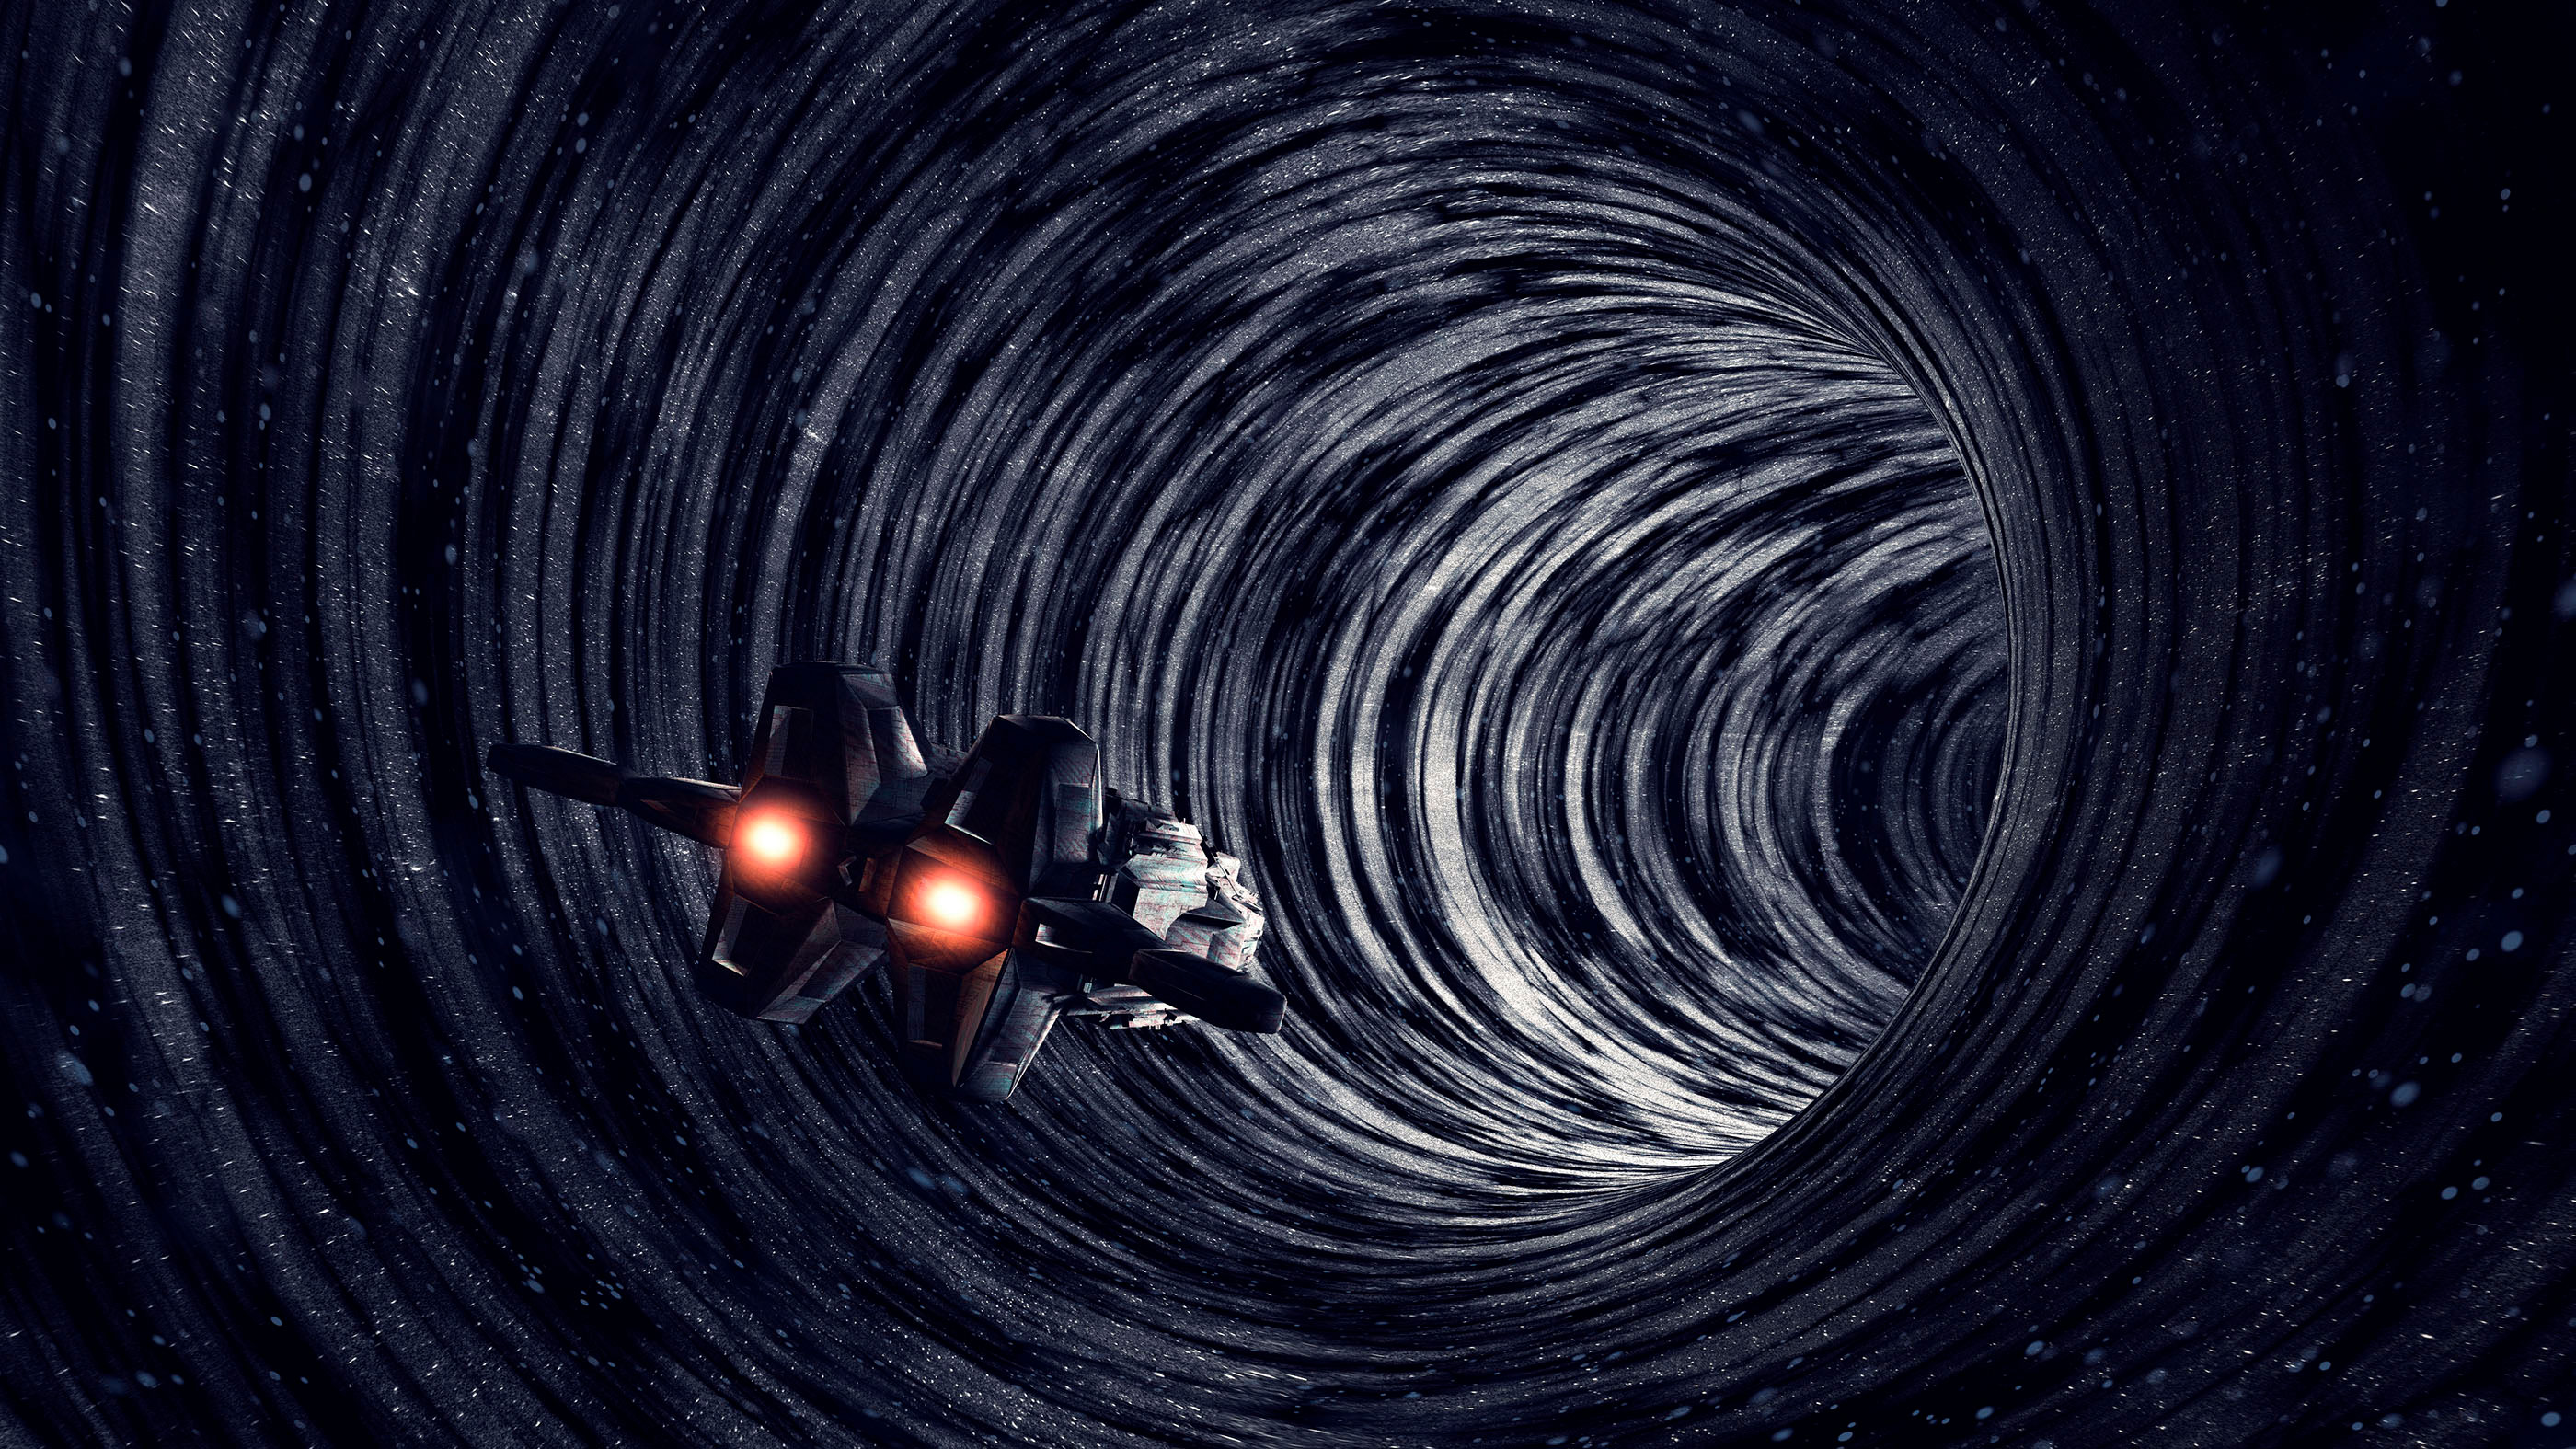 A journey through a stable wormhole